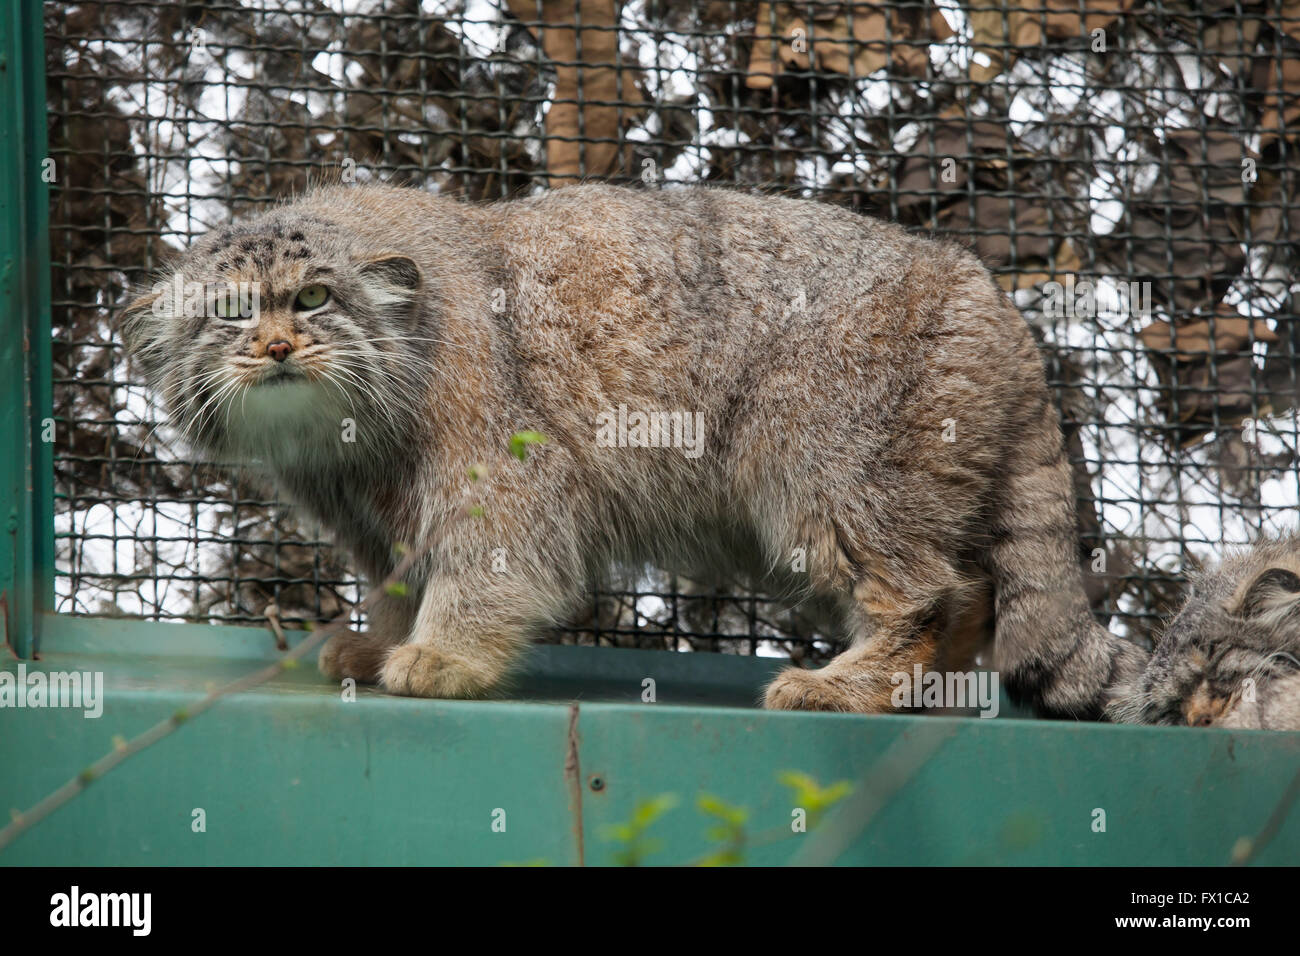 Pallas's cat (Otocolobus manul), also known as the manul at Budapest Zoo in Budapest, Hungary. Stock Photo